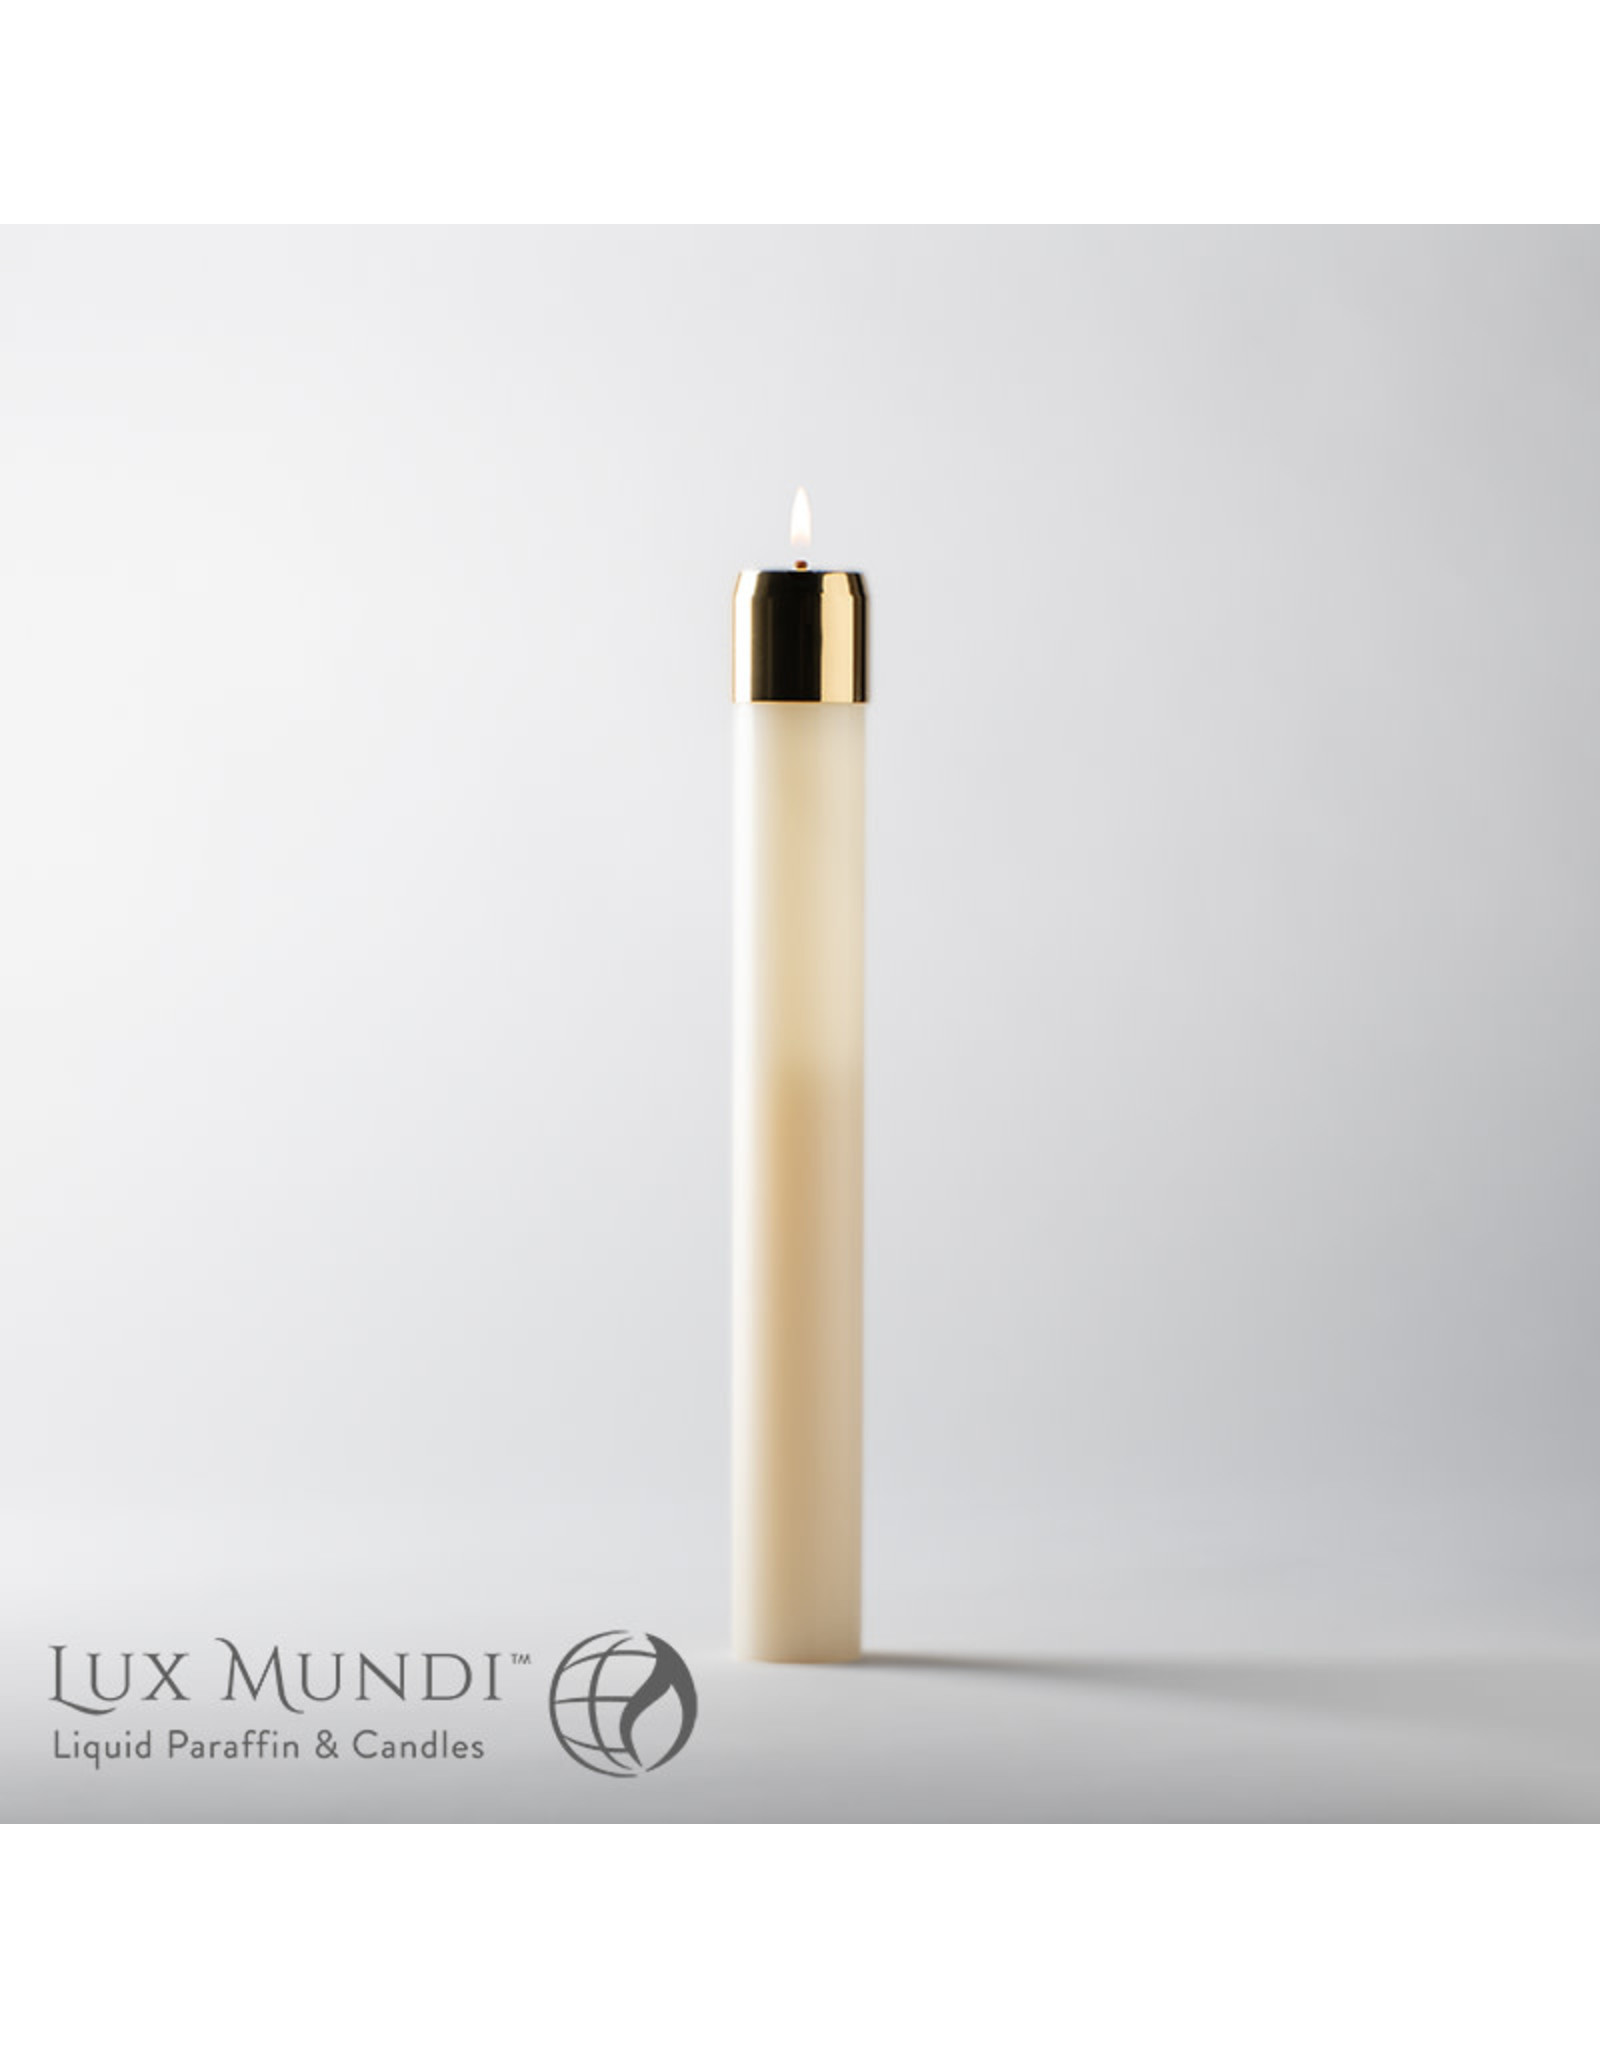 Lux Mundi Refillable Oil Altar Candle 1-1/2"x16"